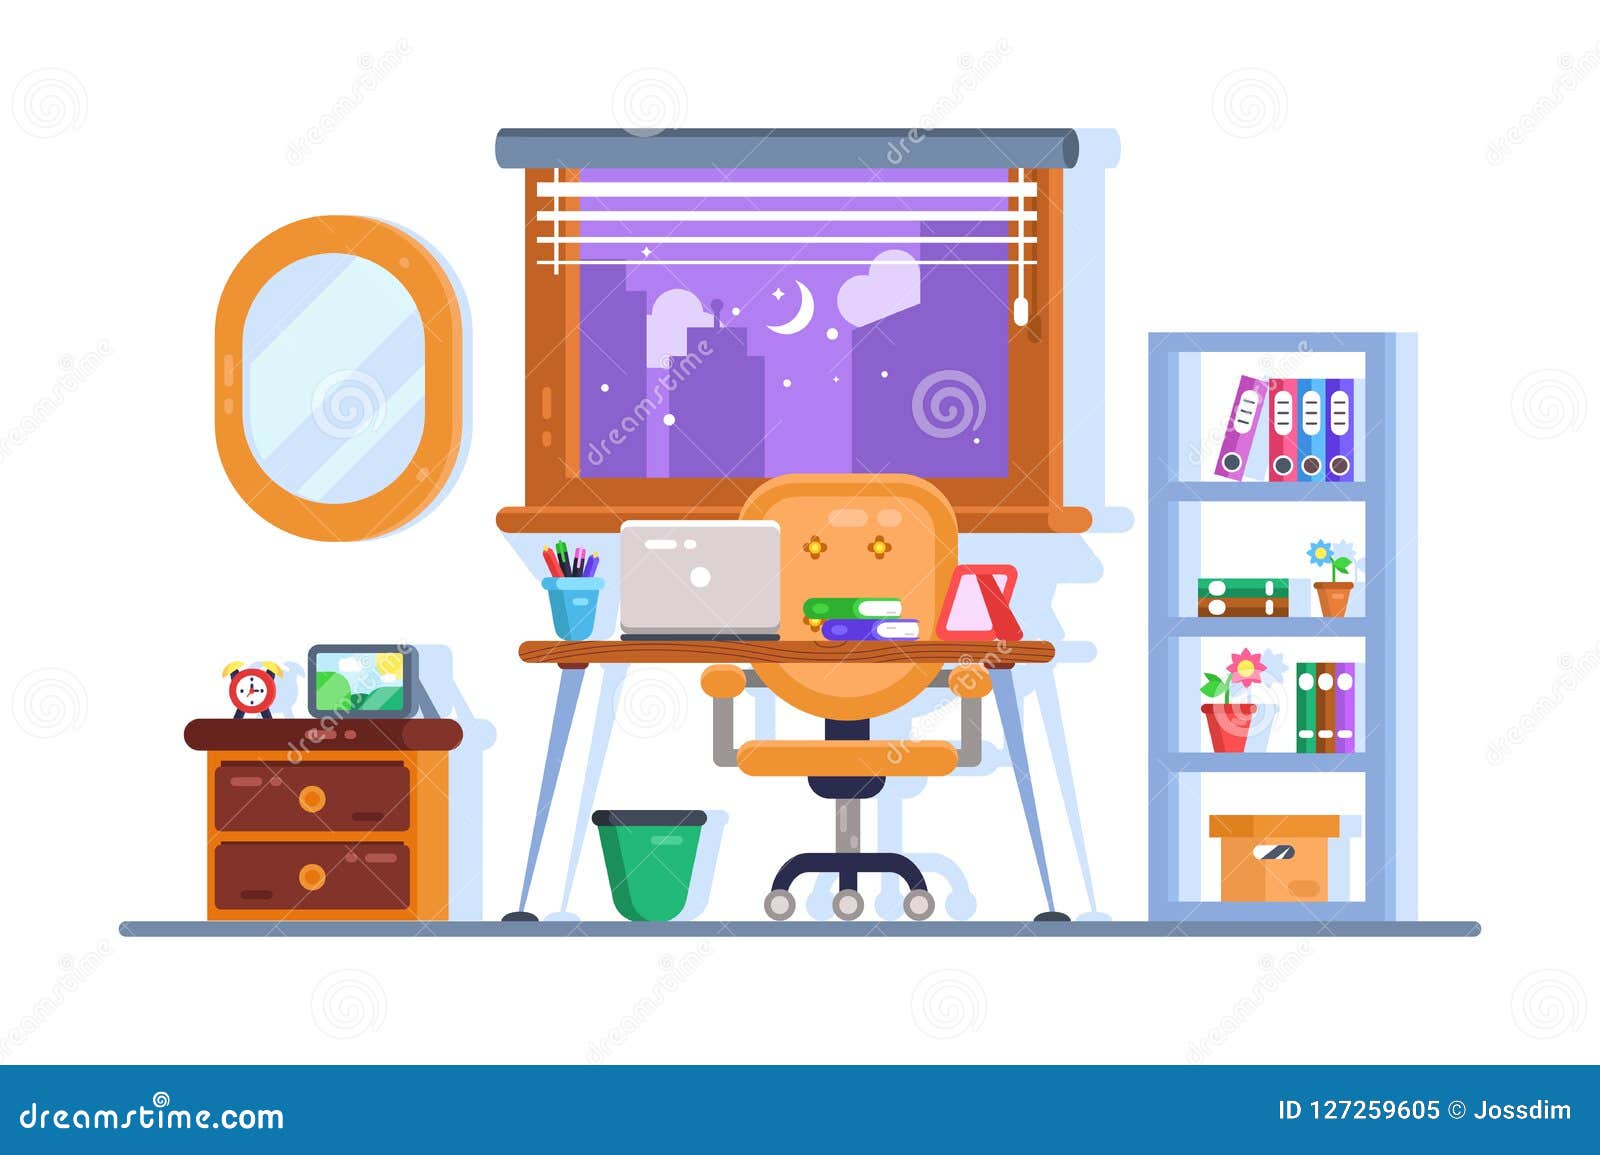 Home Or Office Workplace Interior Design Stock Vector